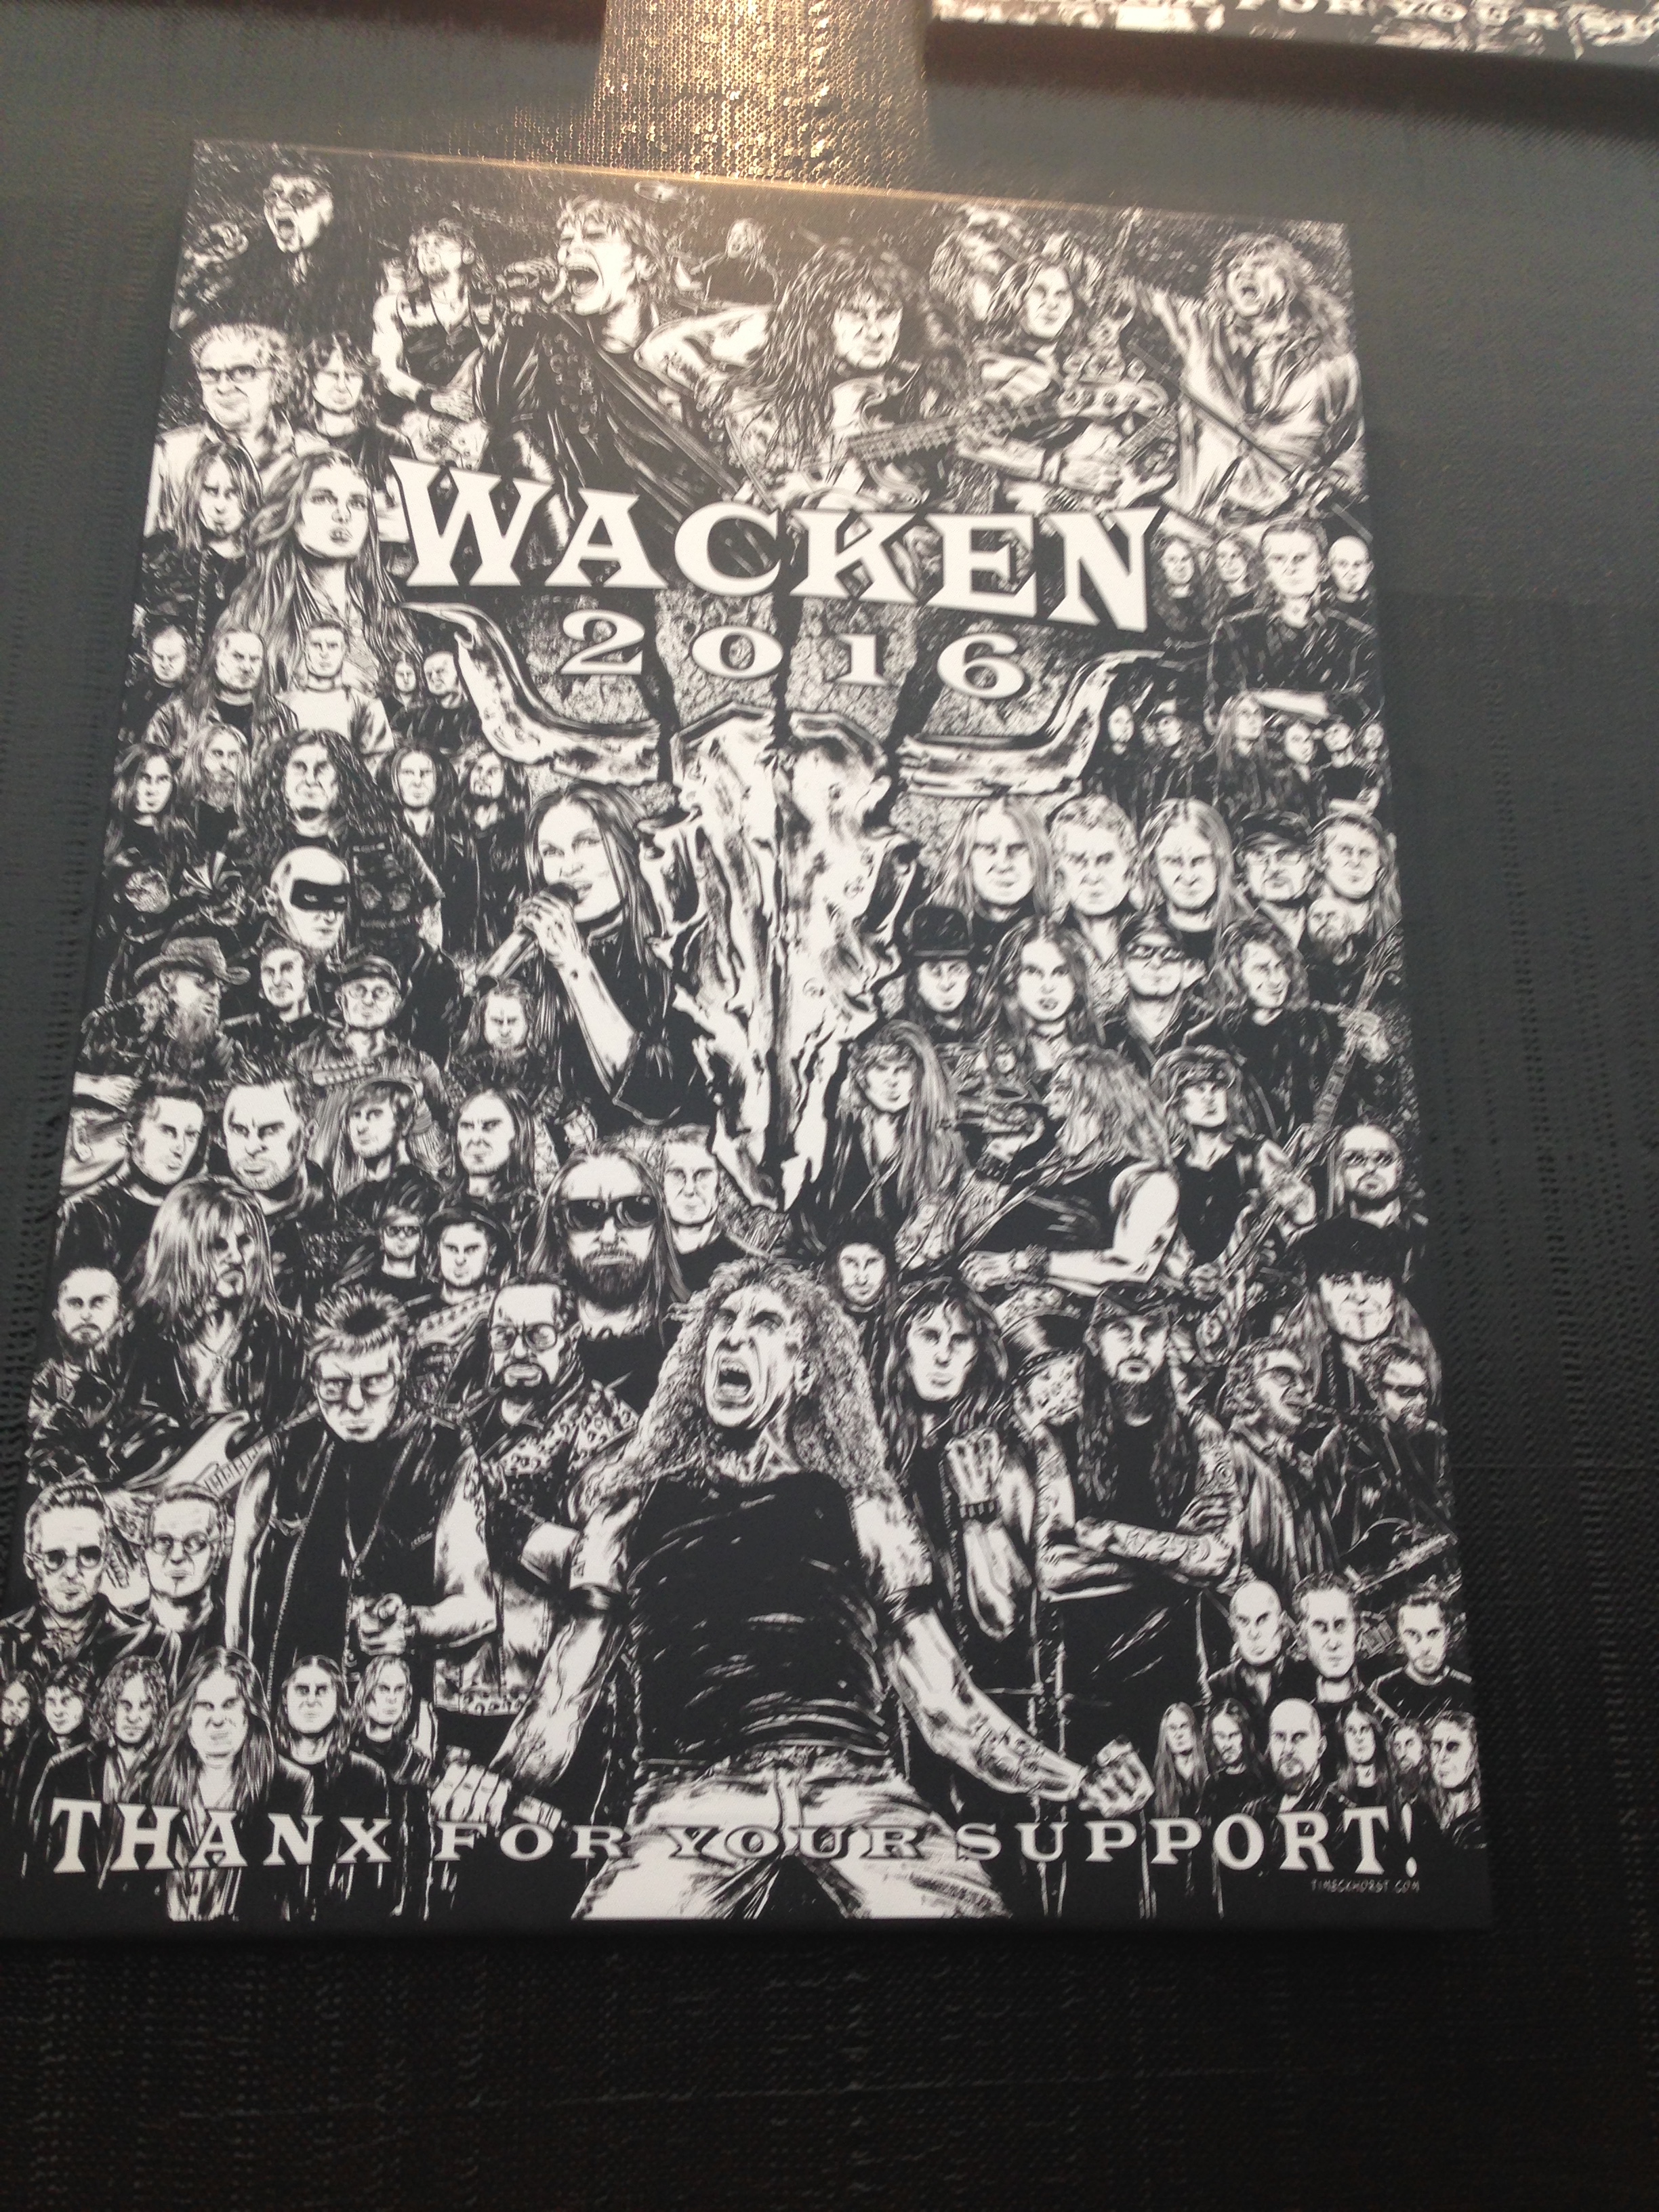 Wacken 2016 - Thanx for your Support!